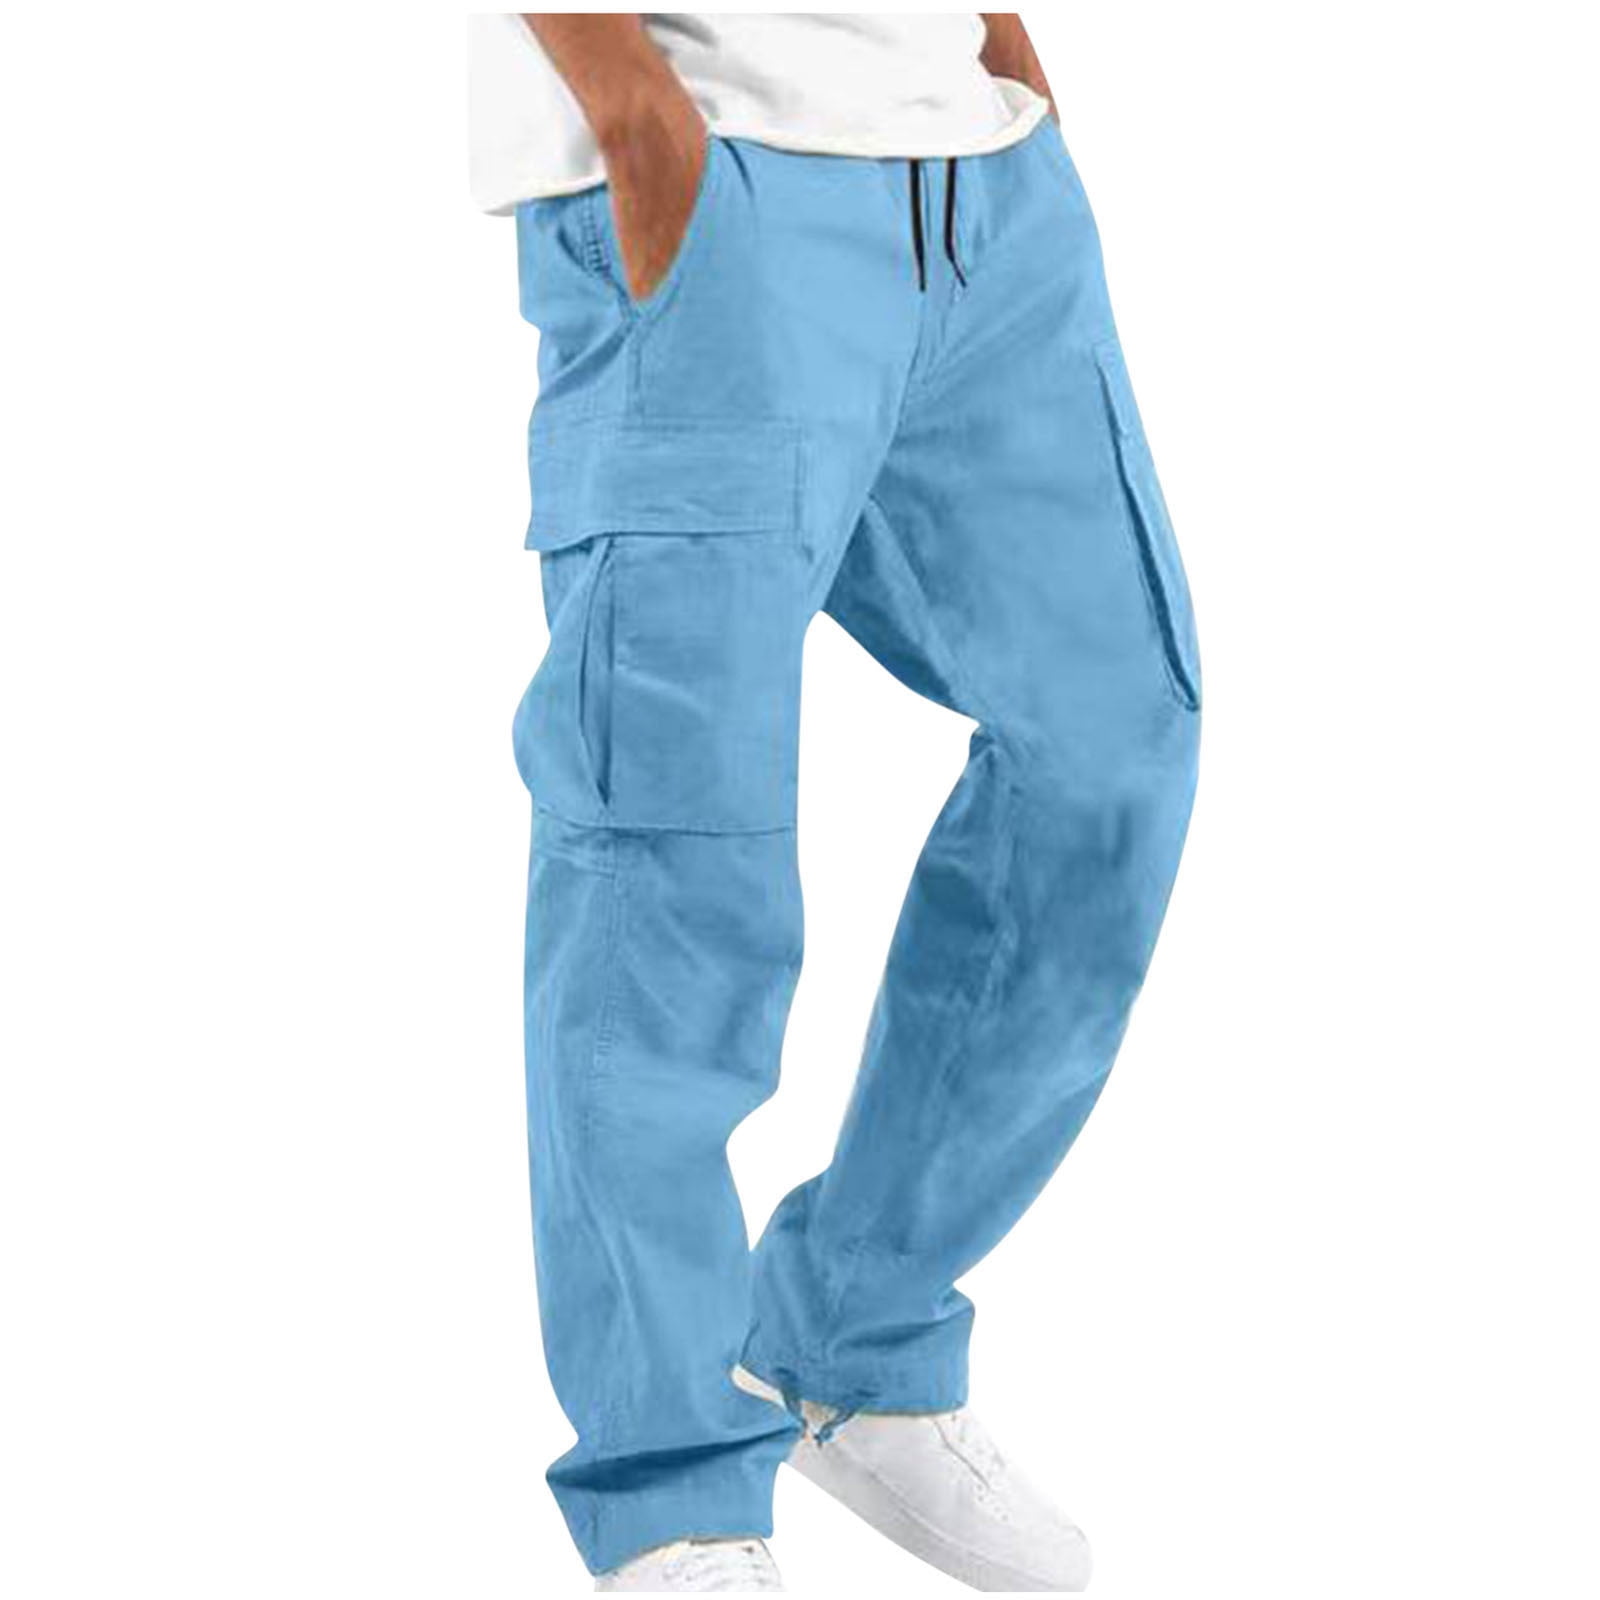 Emmiol Free shipping 2024 Men's Vintage Pocket Loose Cargo Pants Green XL  in Cargo Pants online store.